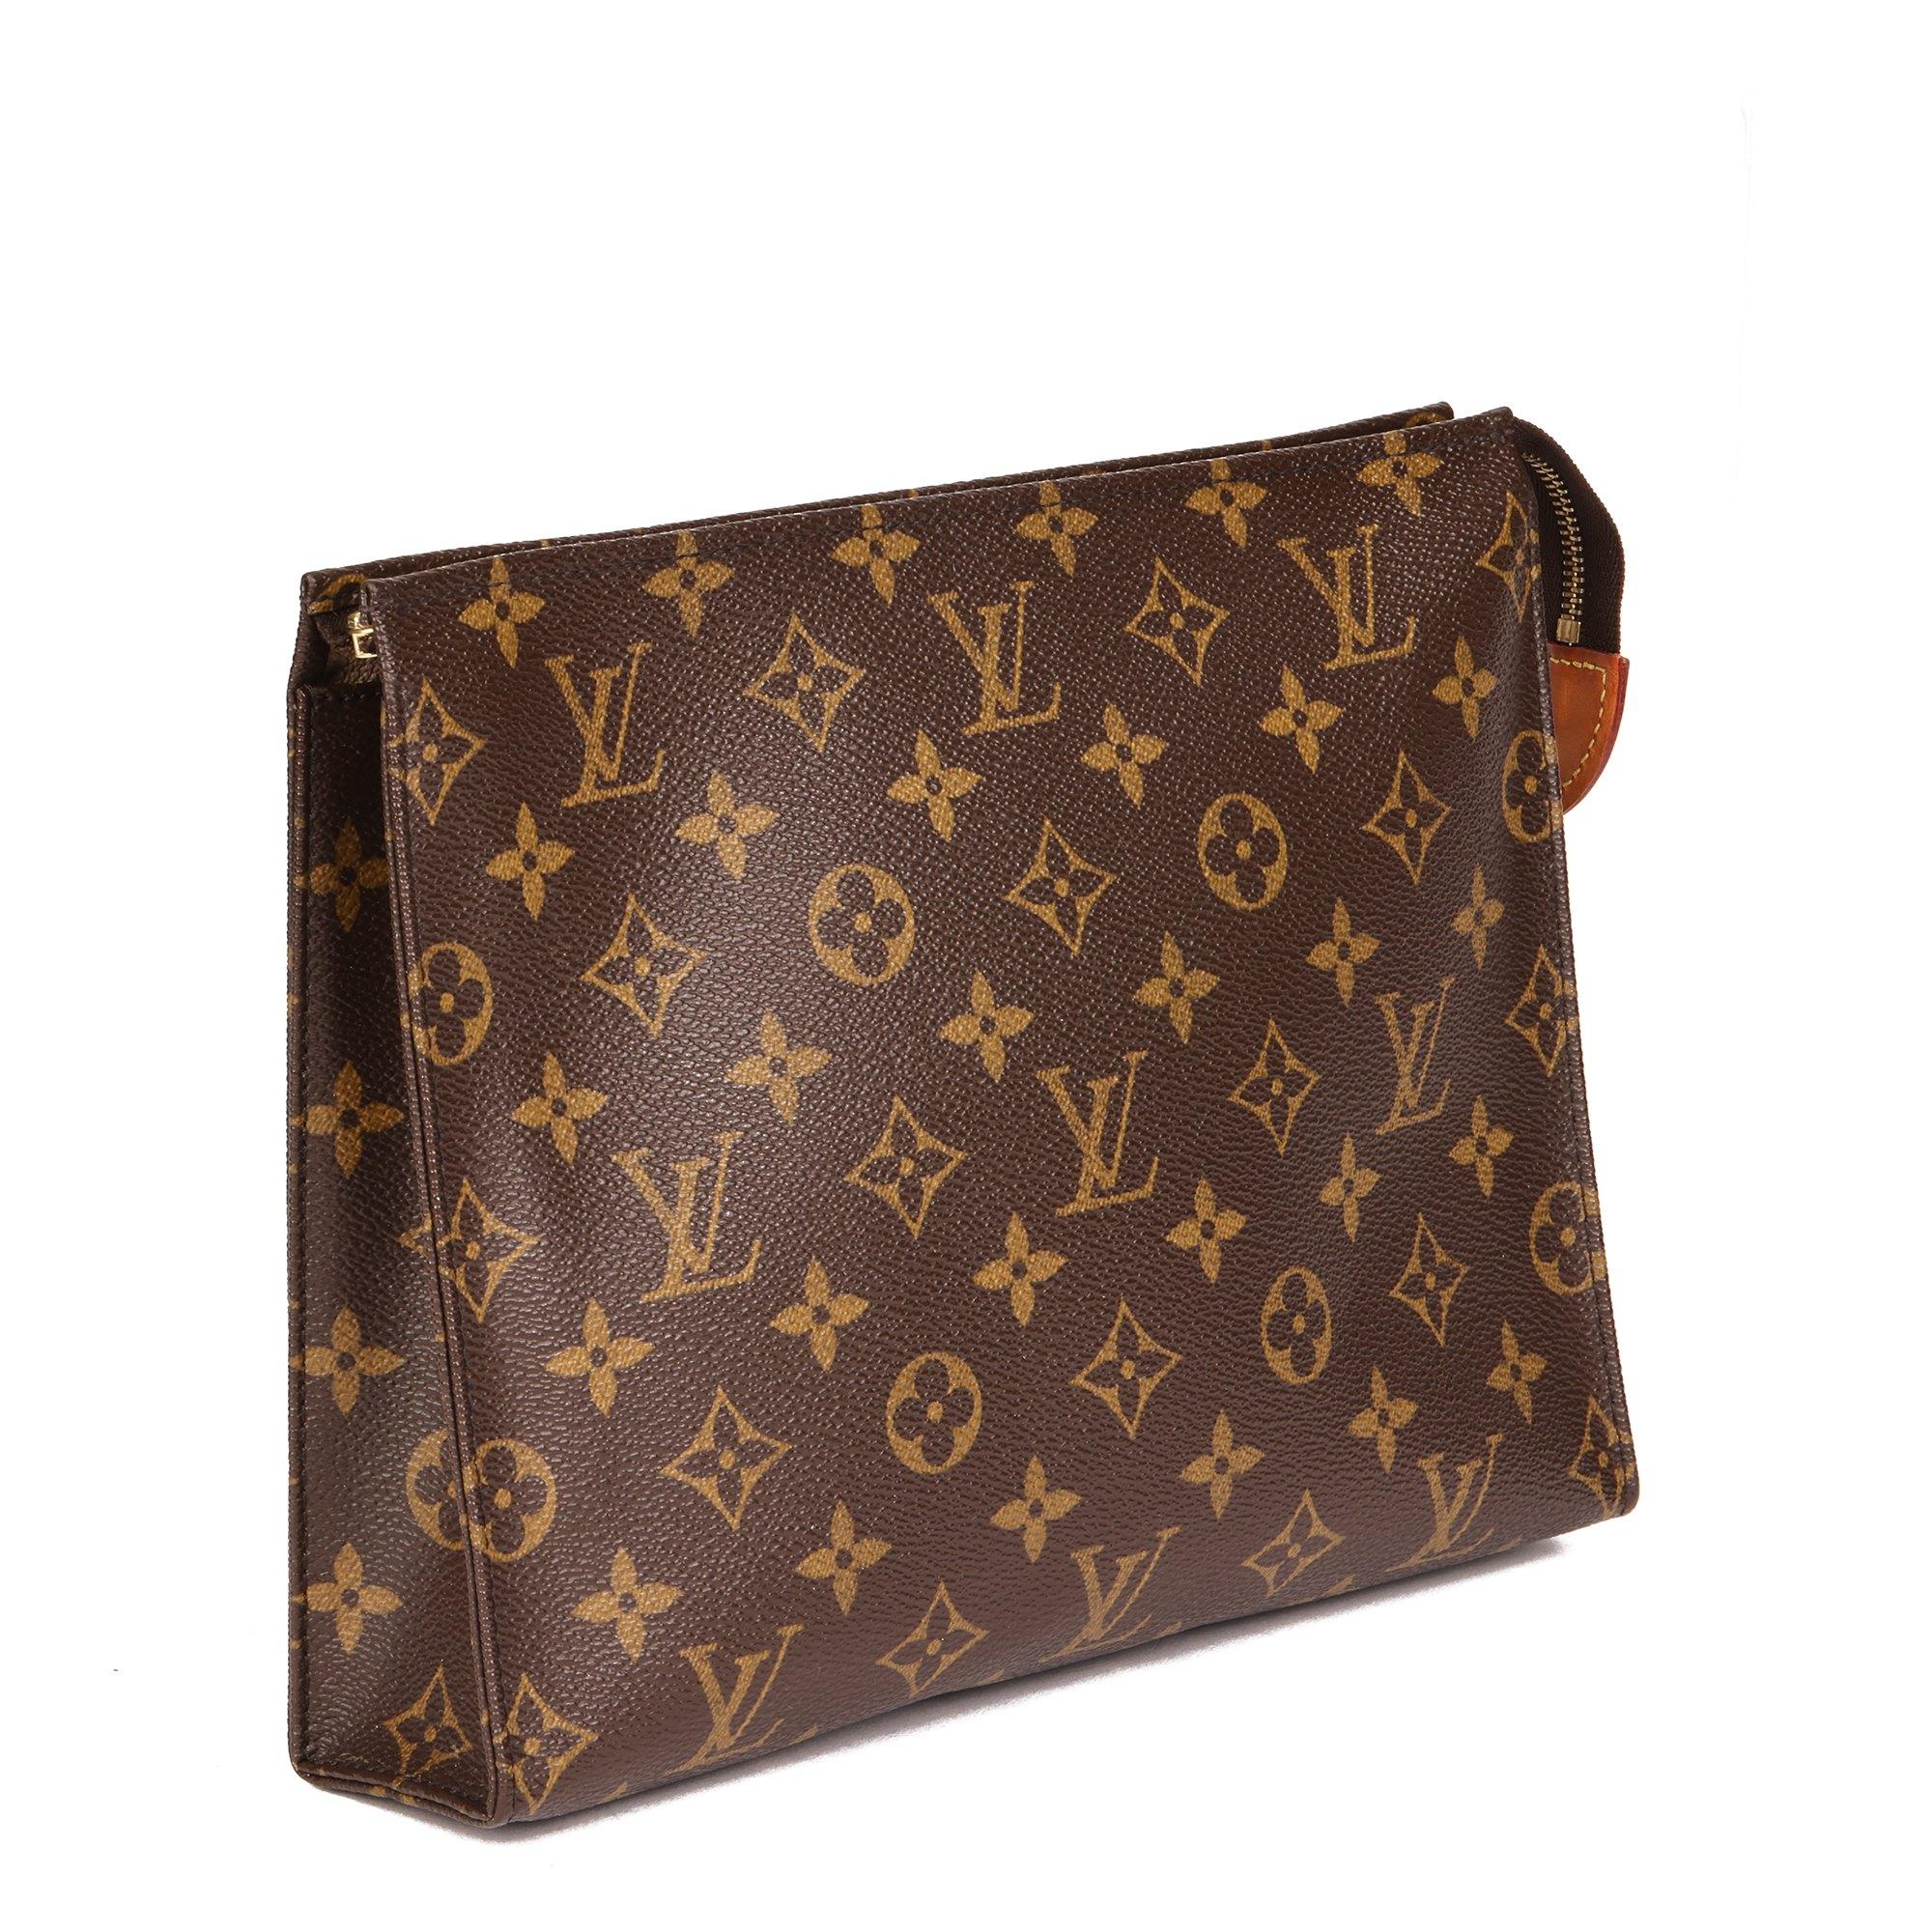 Louis Vuitton BROWN MONOGRAM COATED CANVAS TOILETRY POUCH 26

CONDITION NOTES
The exterior is in excellent condition with light signs of use.
The interior is in excellent condition with light signs of use.
The hardware is in excellent condition with